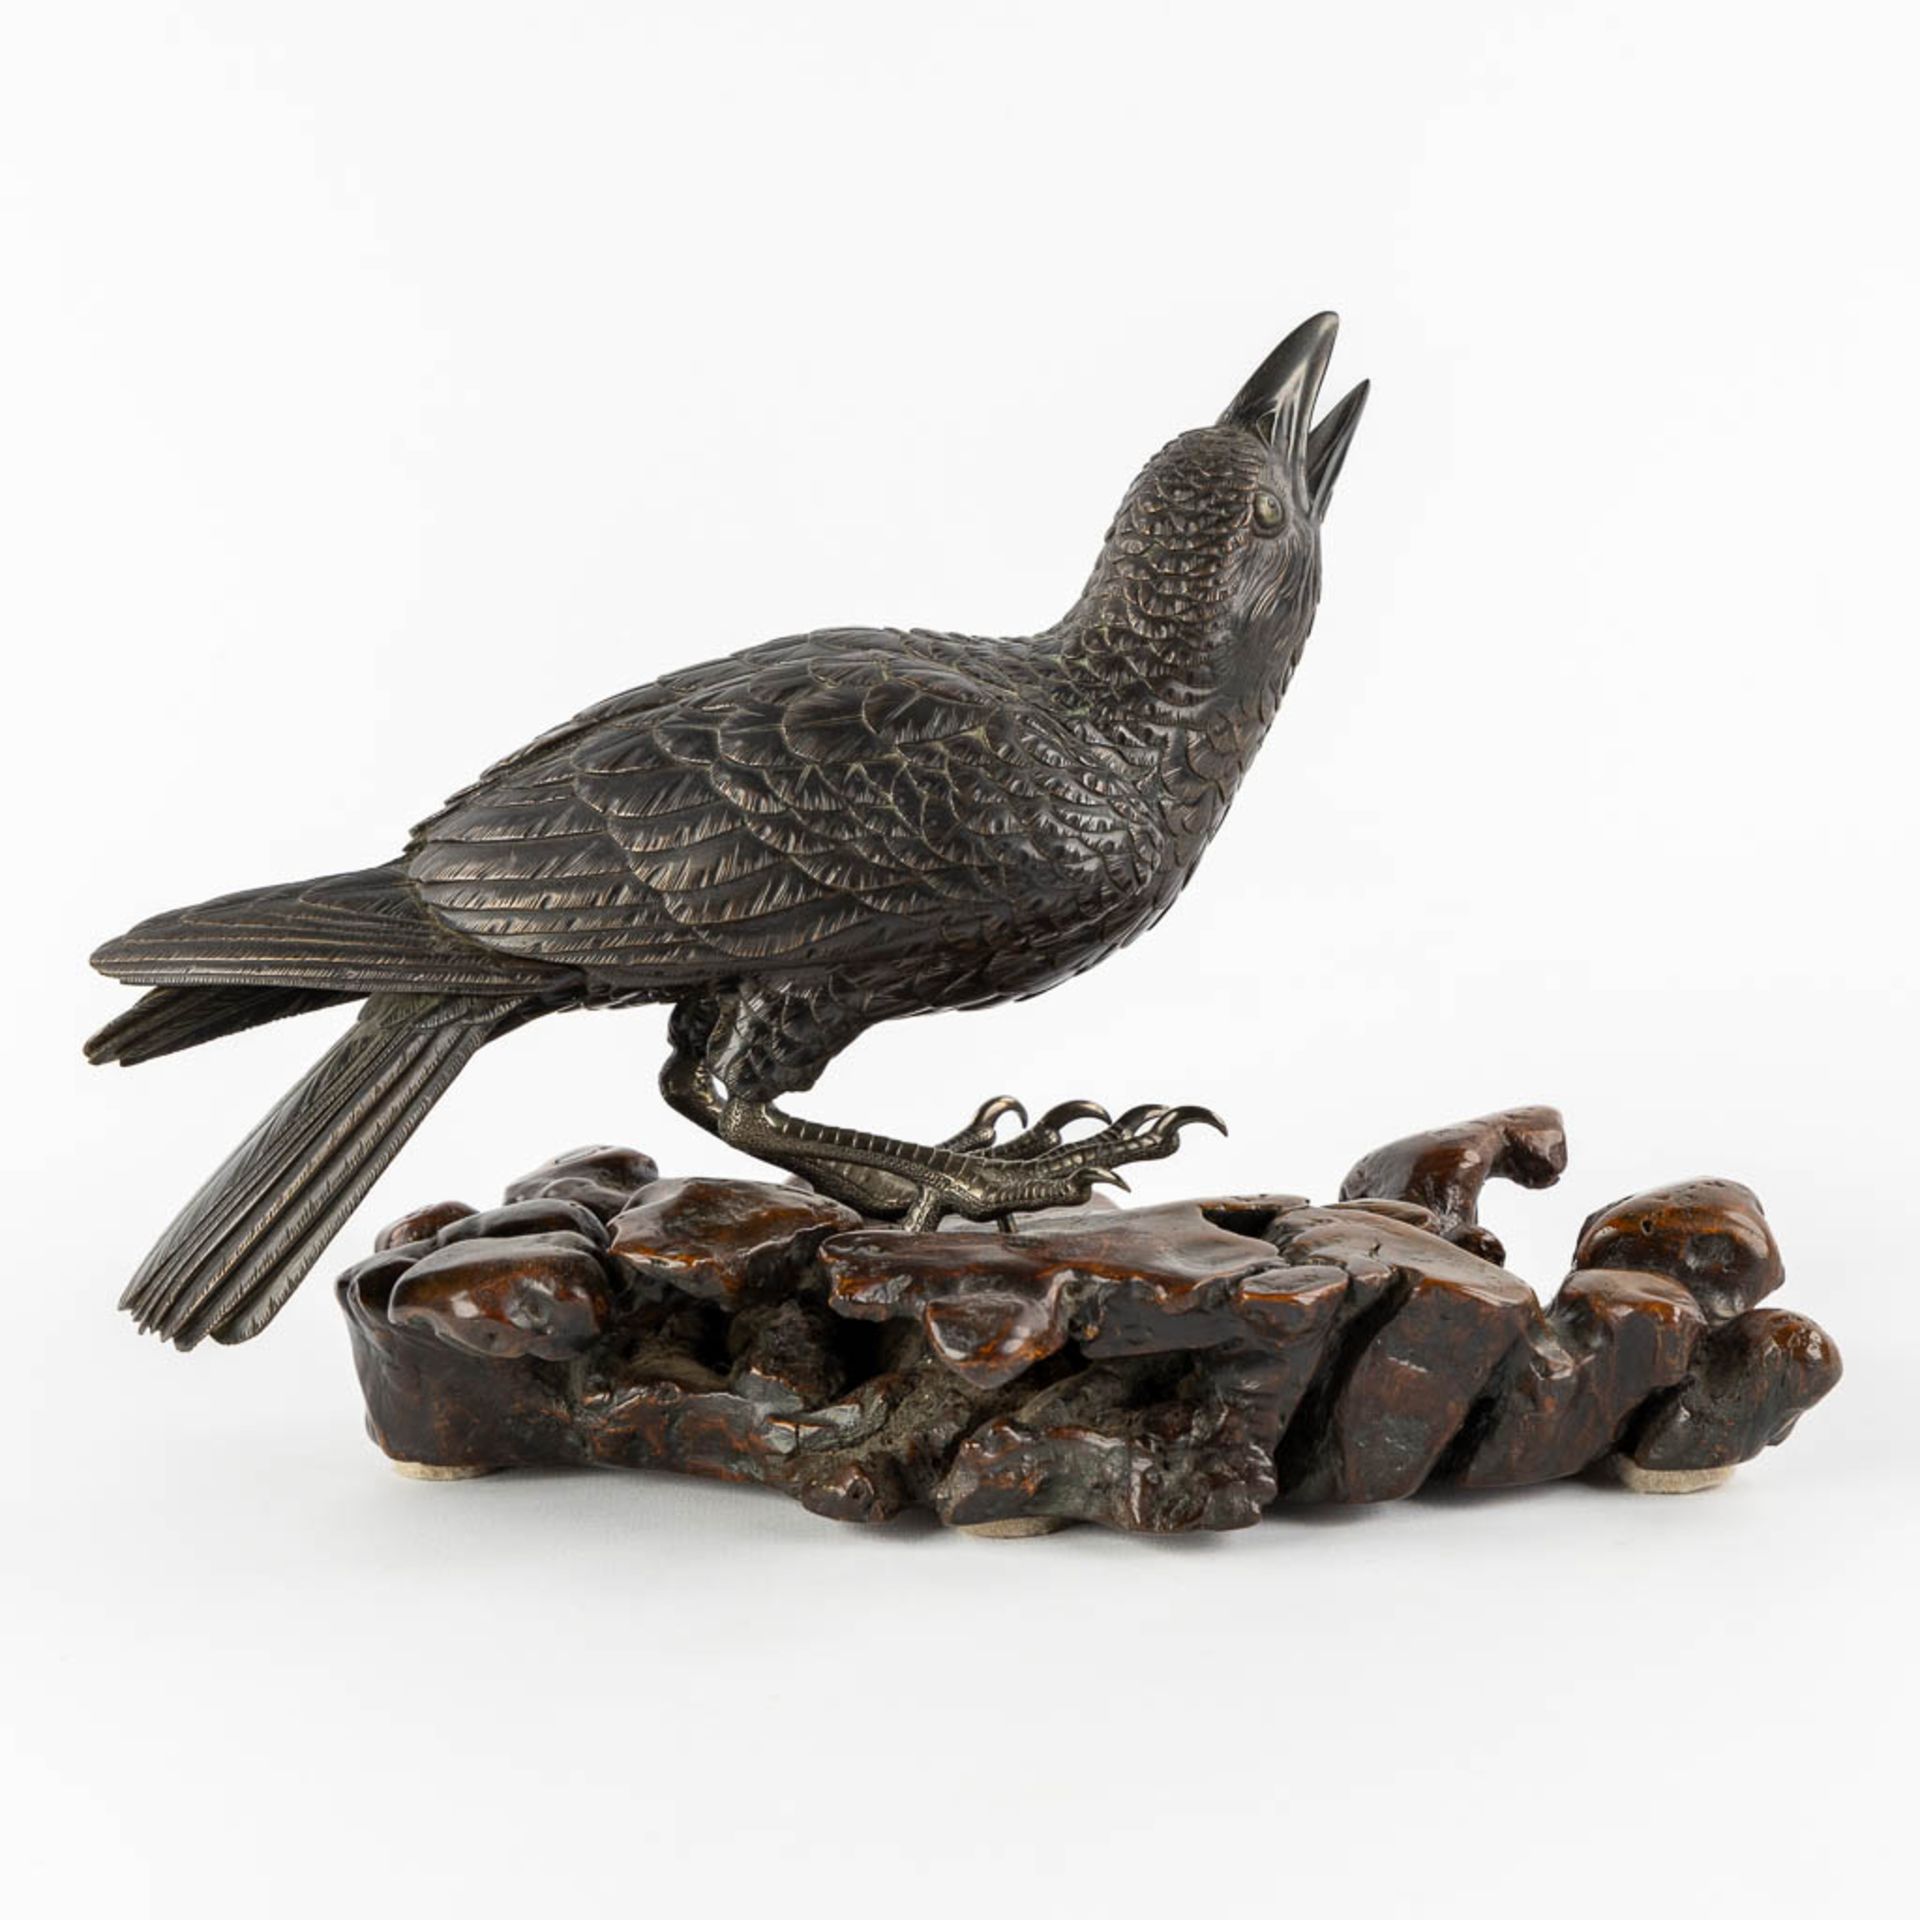 A Raven, patinated bronze mounted on a wood base. Probably Japan. (L:17 x W:30 x H:17 cm) - Image 5 of 10